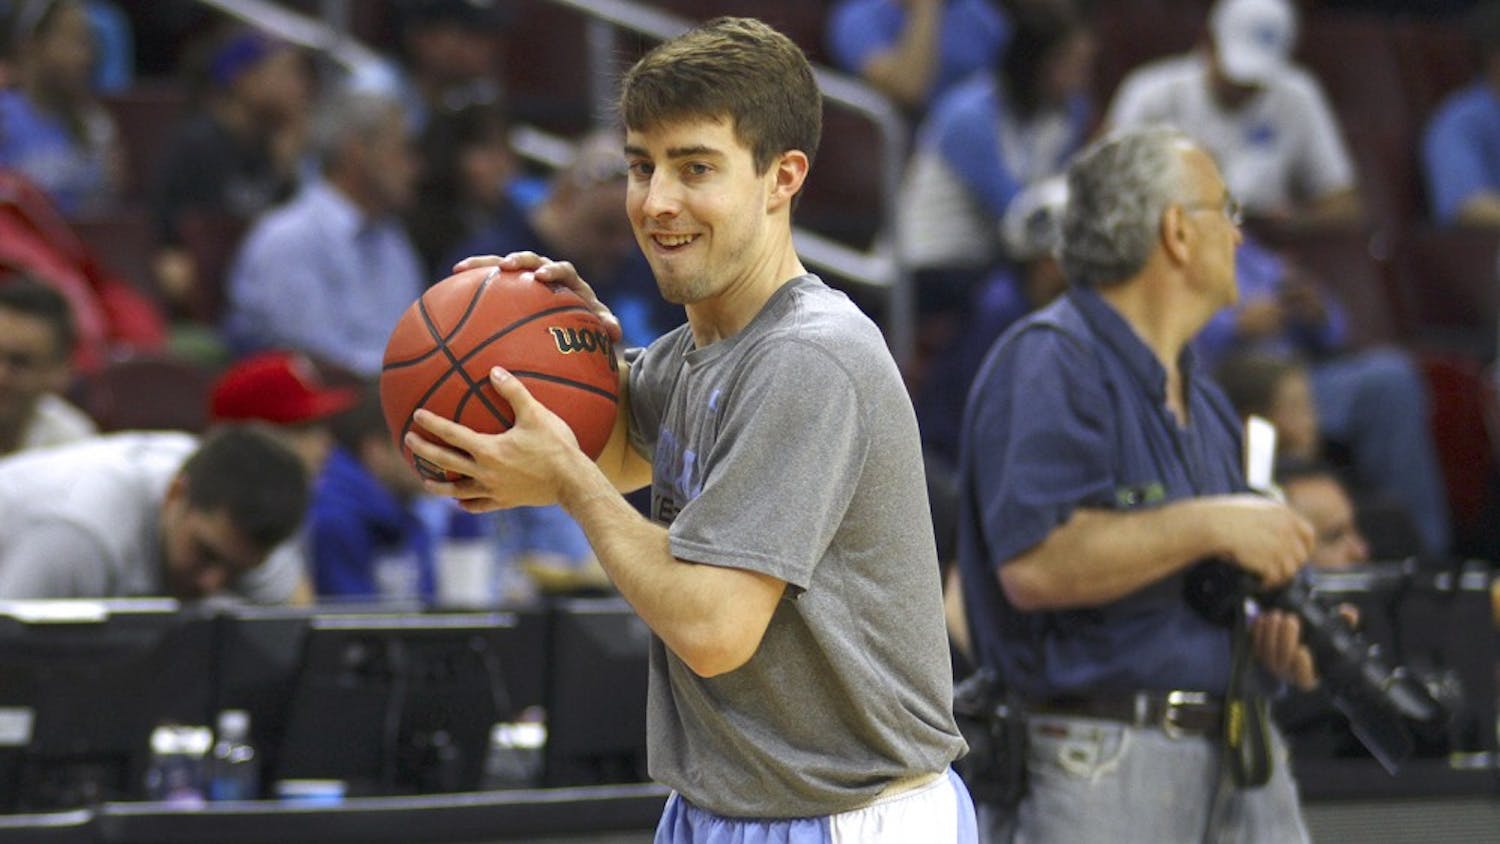 Manager Forrest Reynolds passes the ball during warm ups before the Elite Eight game against Notre Dame. UNC won 88-74.